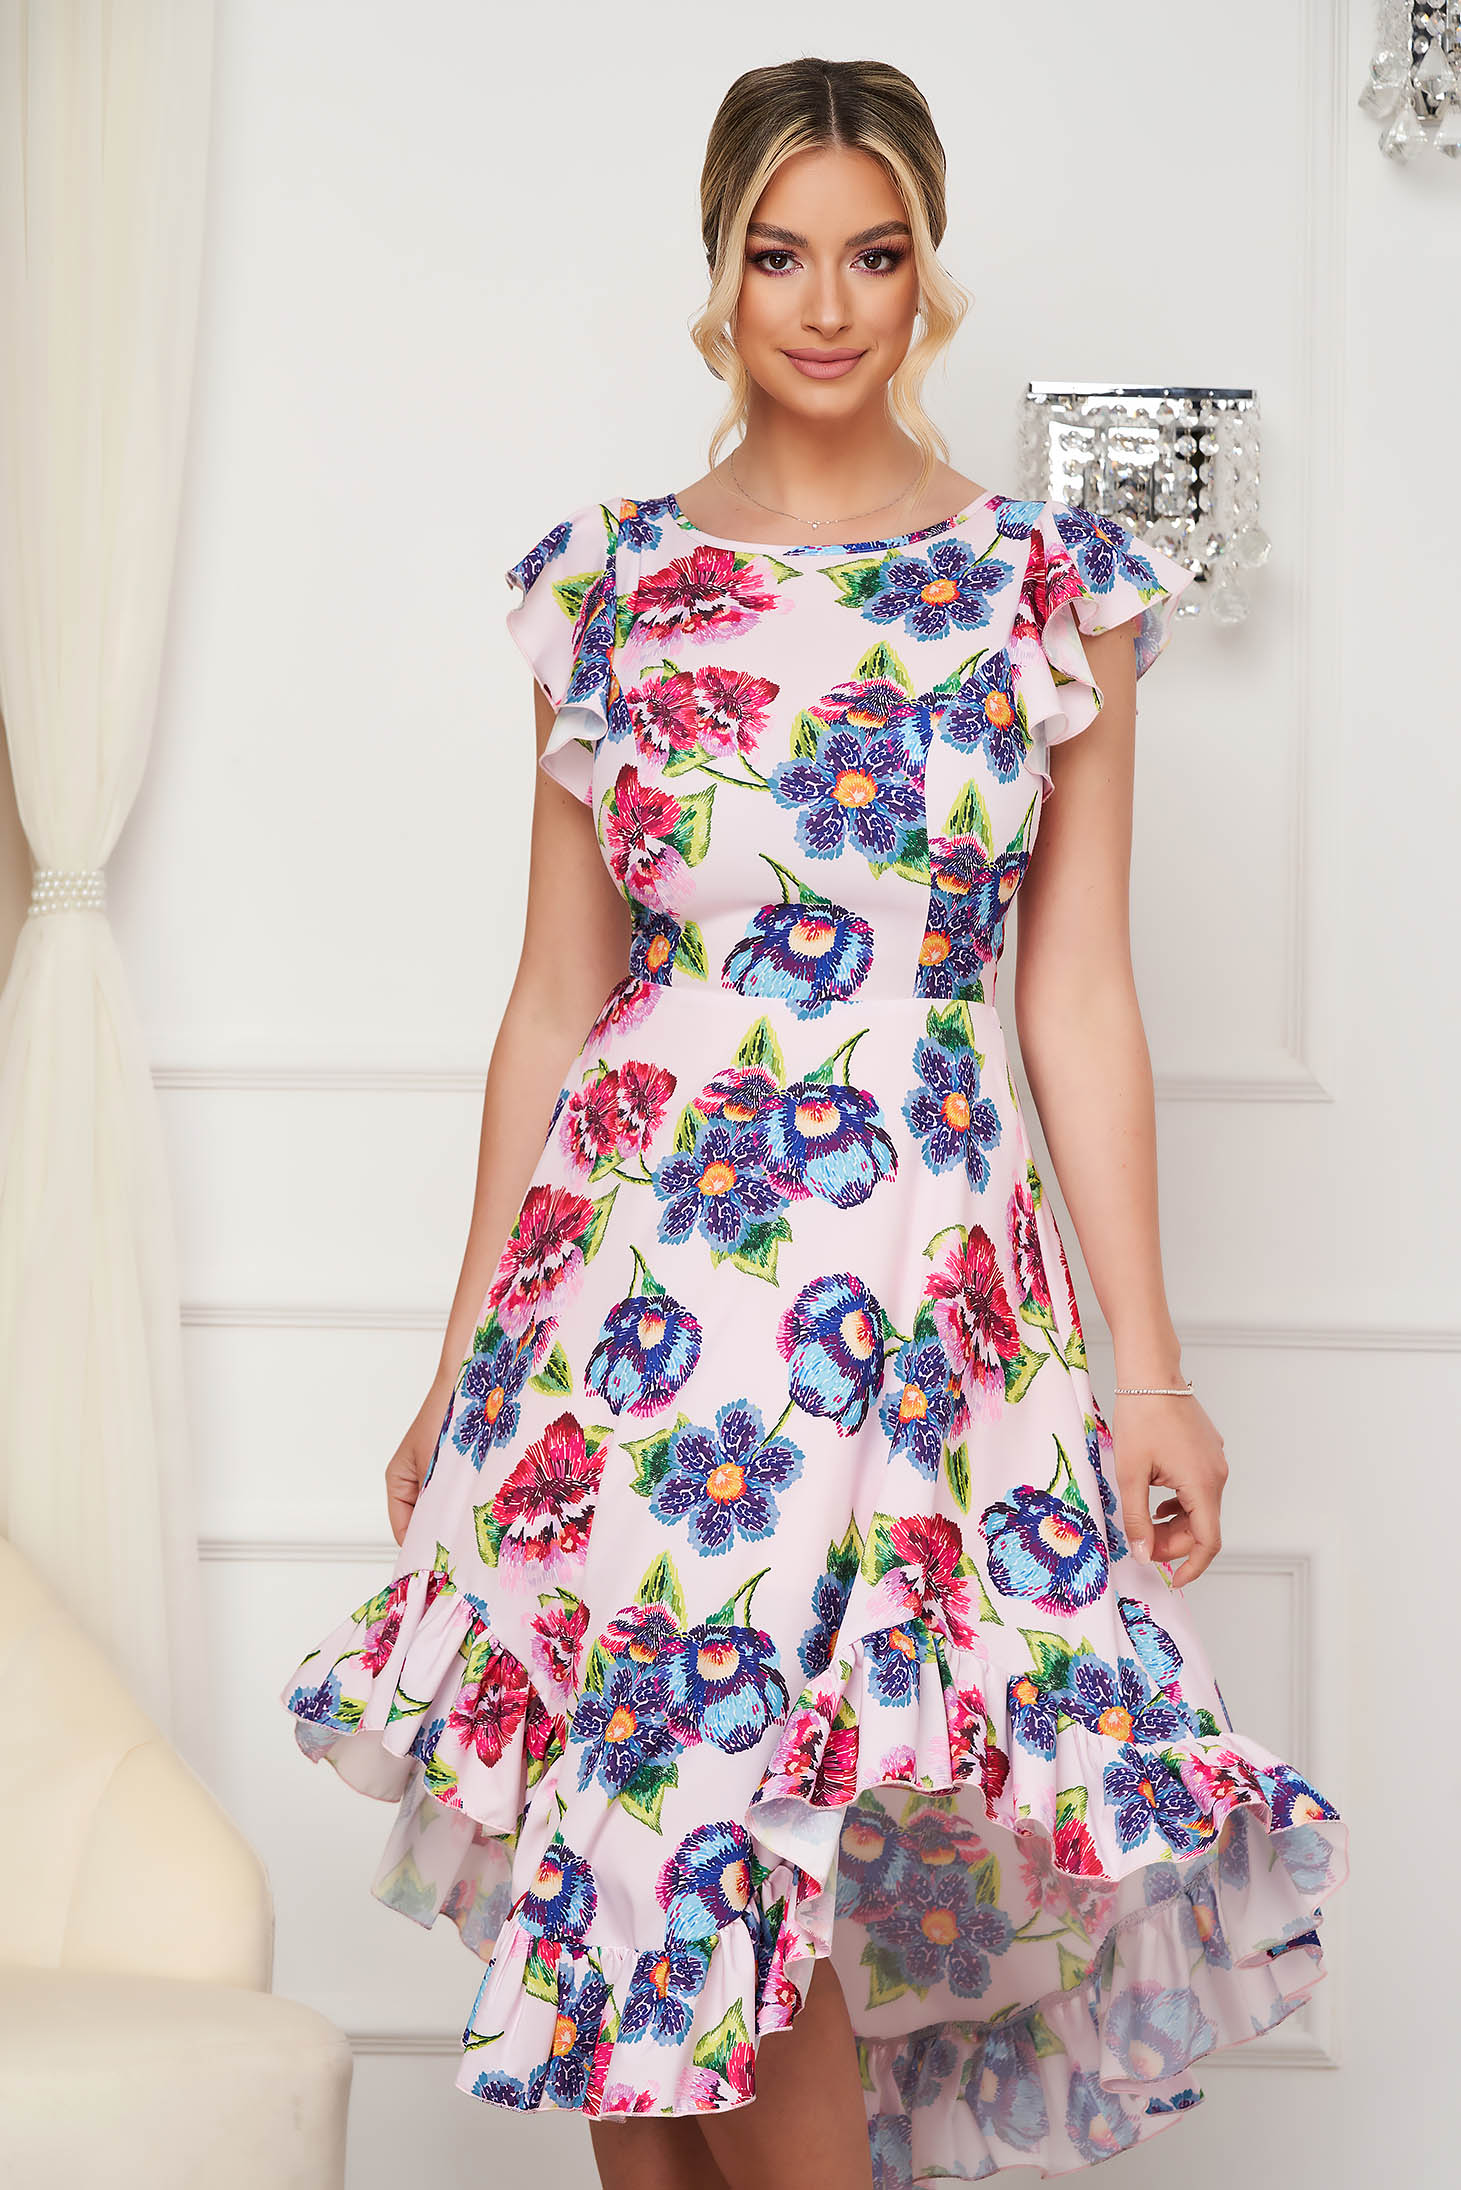 Silk-like Thin Material Midi Asymmetrical A-line Dress with Ruffles and Digital Floral Print - StarShinerS